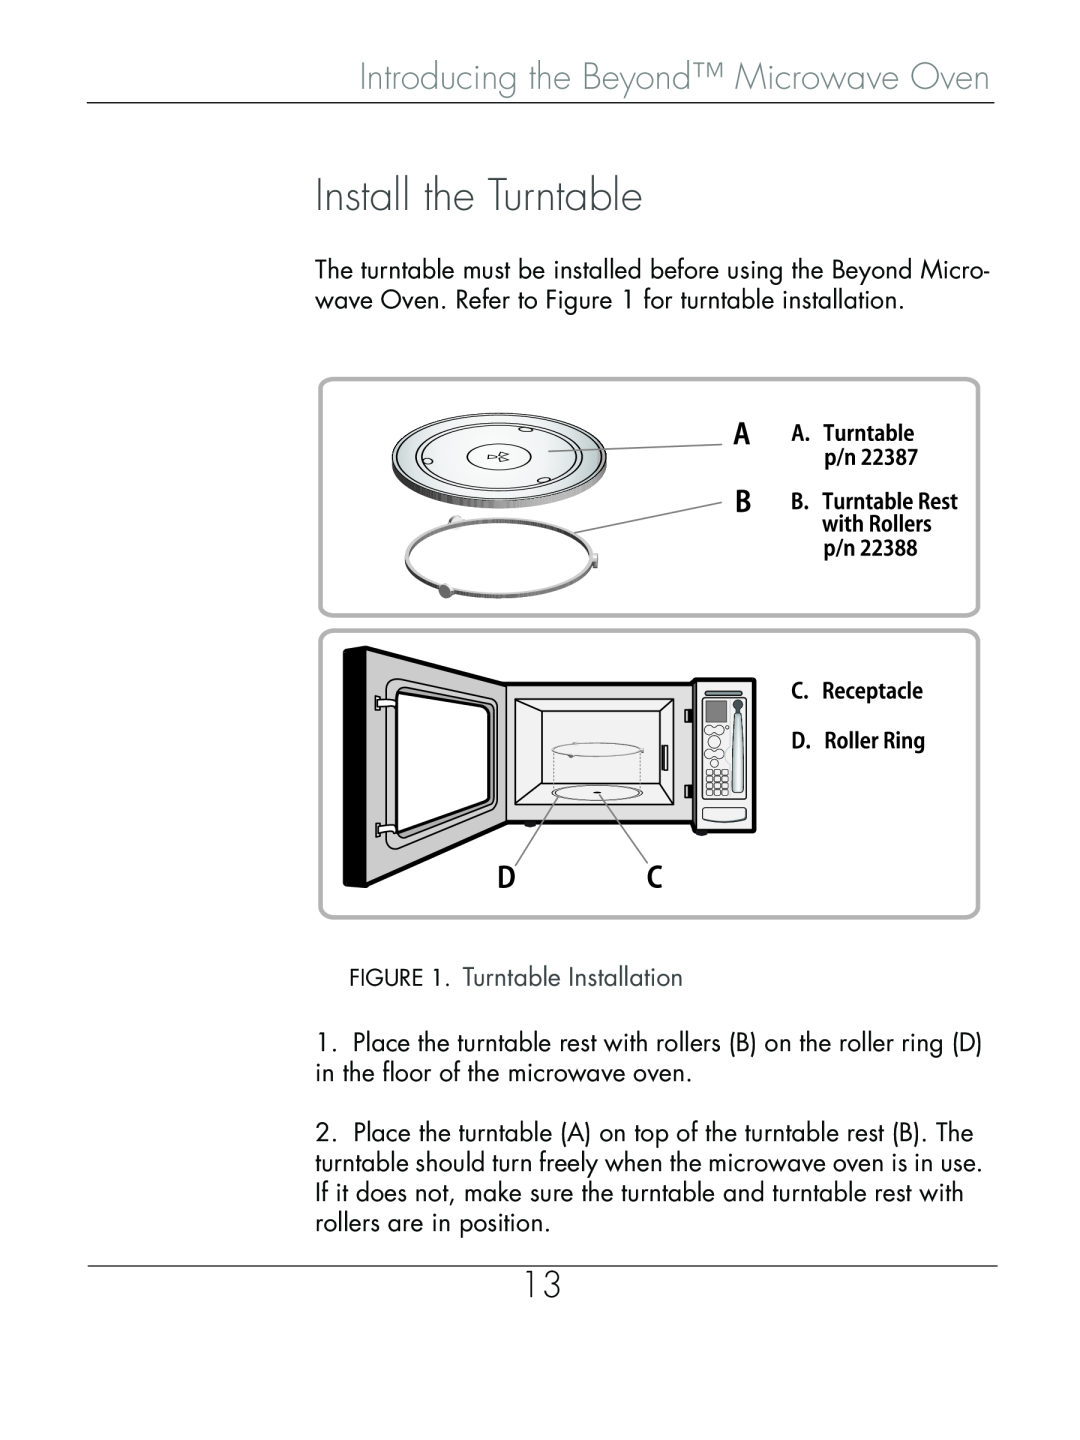 Beyond Microwace Oven manual Install the Turntable, Turntable Installation, Introducing the Beyond Microwave Oven 